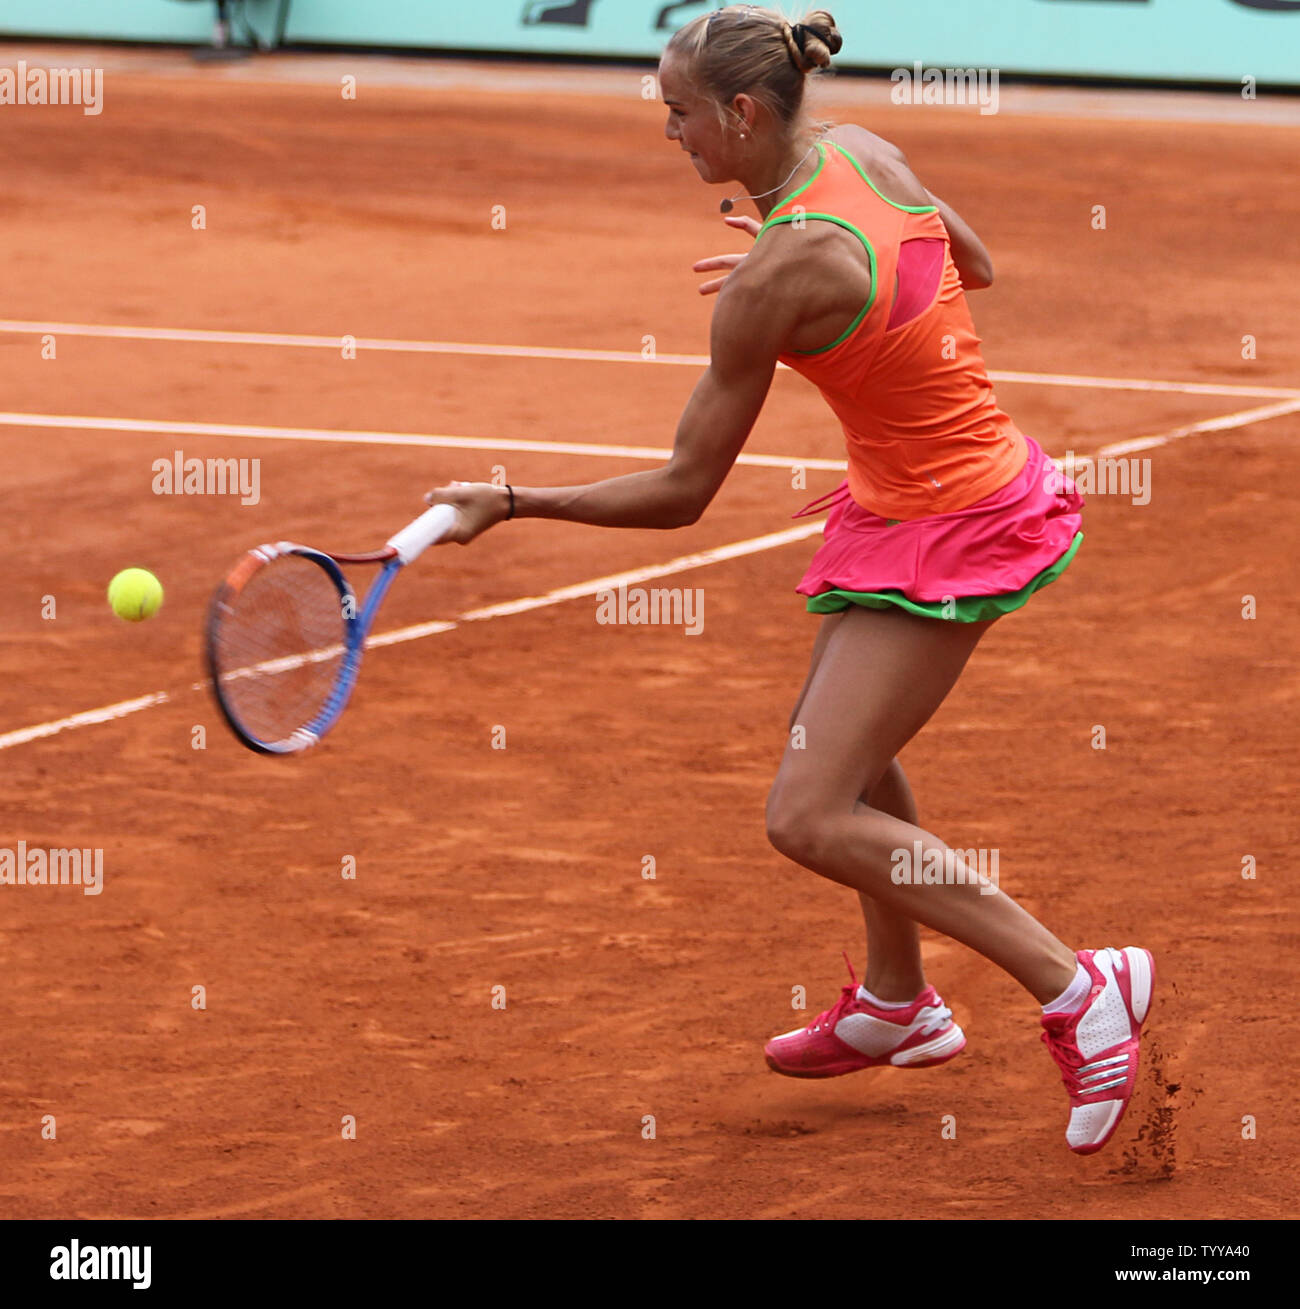 Arantxa Rus of The Netherlands hits a shot during her French Open womens second round match against Kim Clijsters of Belgium at Roland Garros in Paris on May 26, 2011